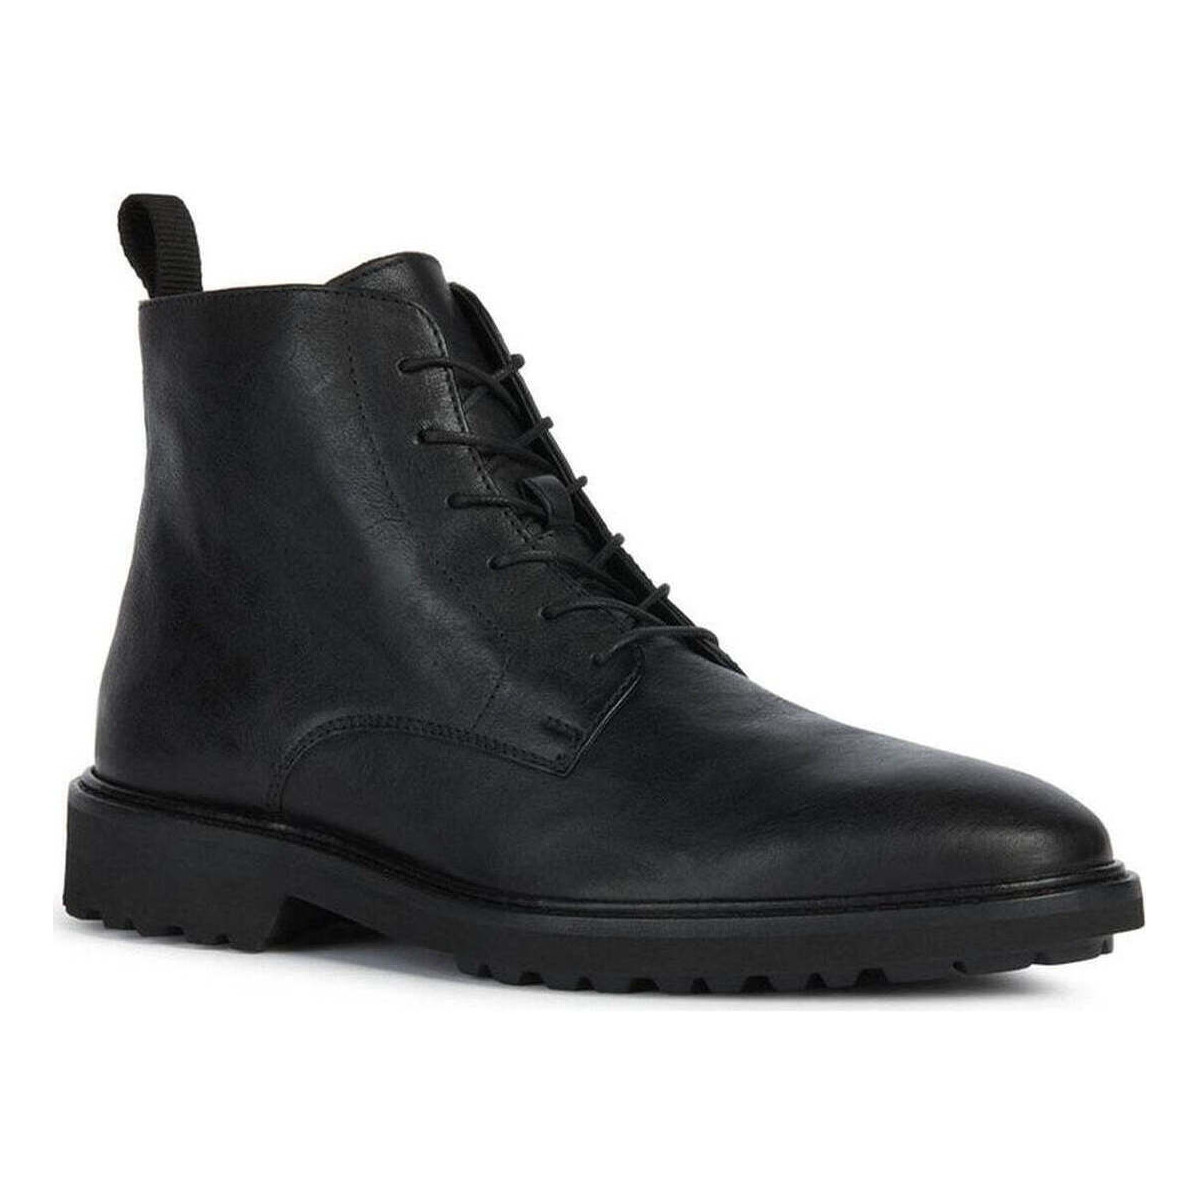 Chaussures Homme Boots Geox cannaregio booties Noir